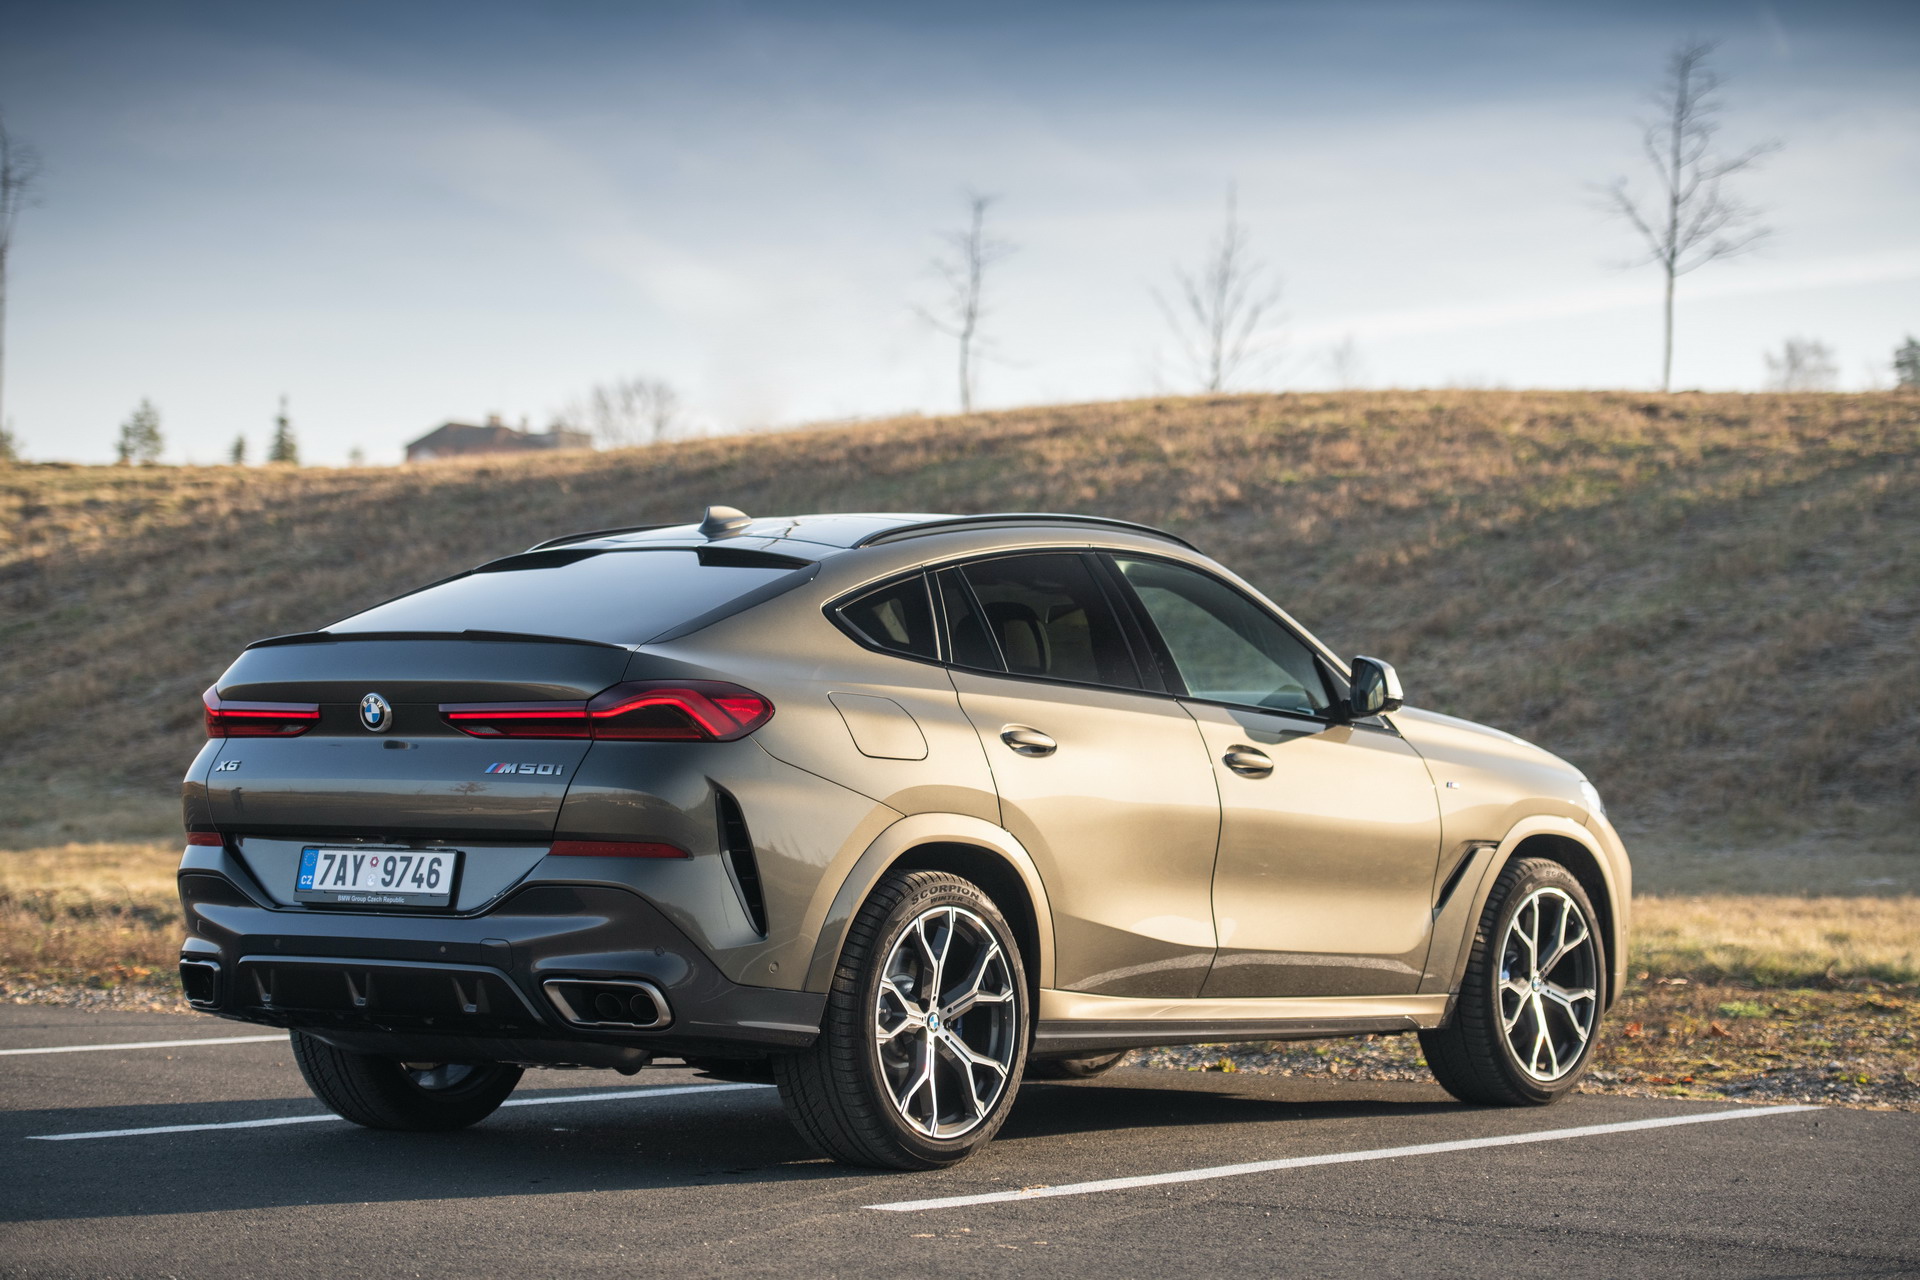 PHOTOS: Media launch of the new BMW X6 M50i in Czech Republic – Cars